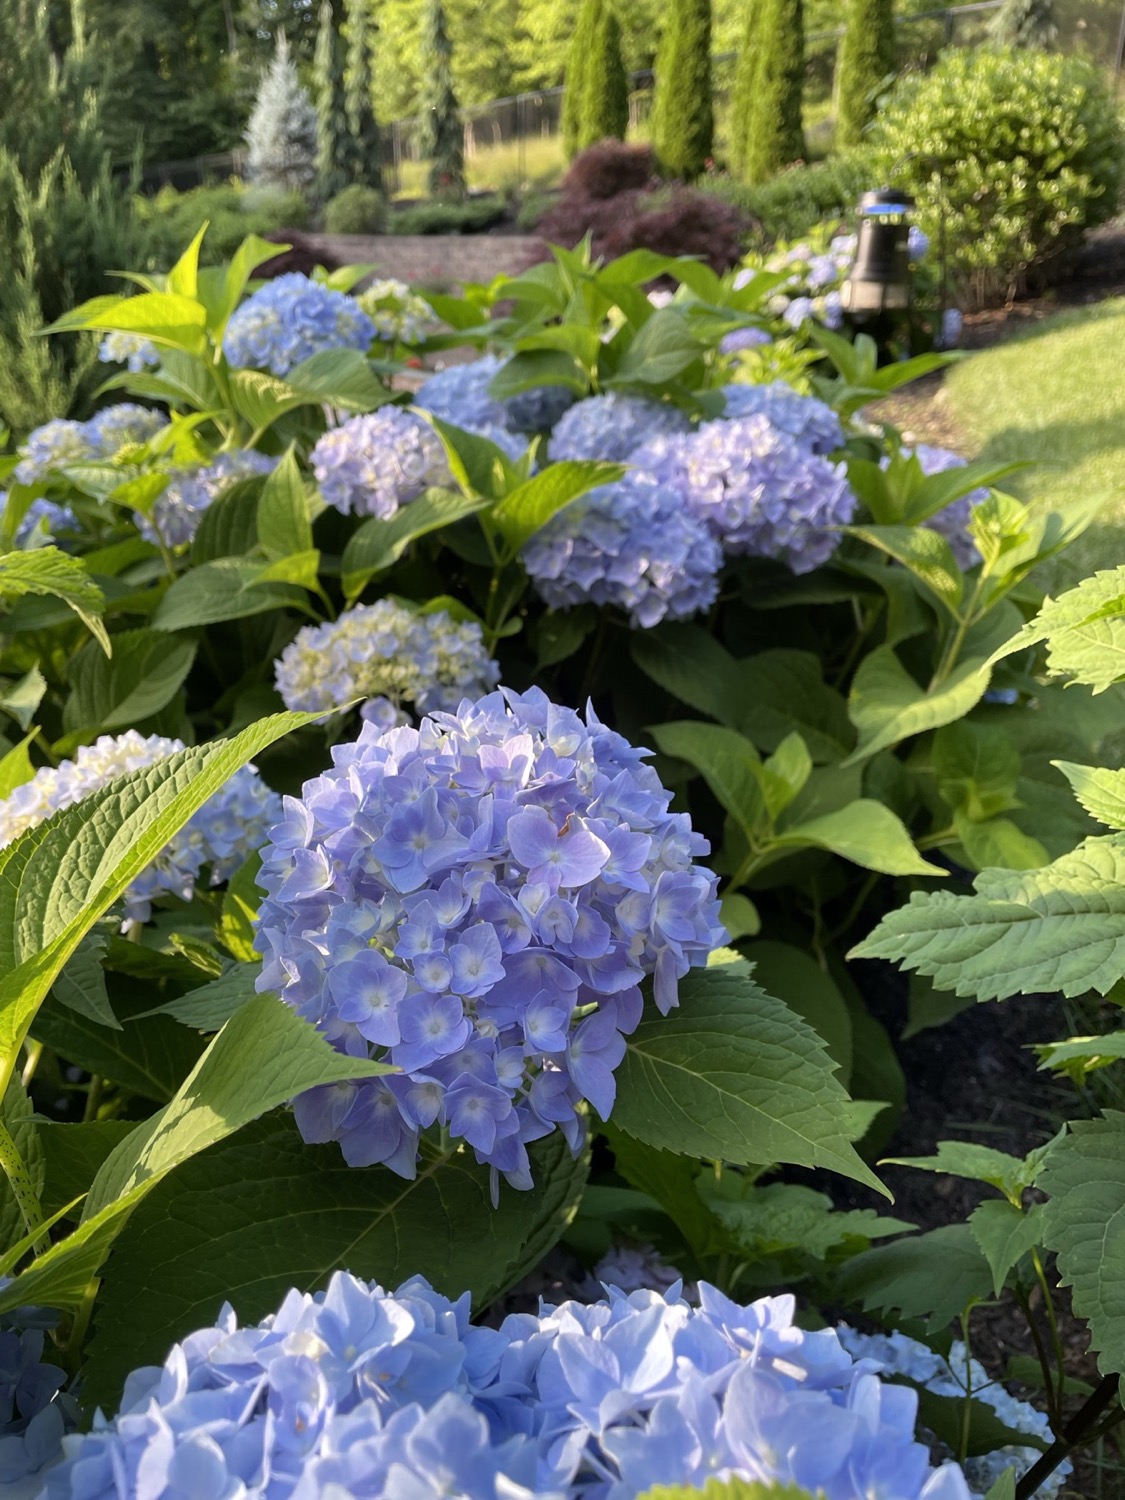 Serene blue Hydrangea flowers in a suburban garden with tall green conifers in the background.